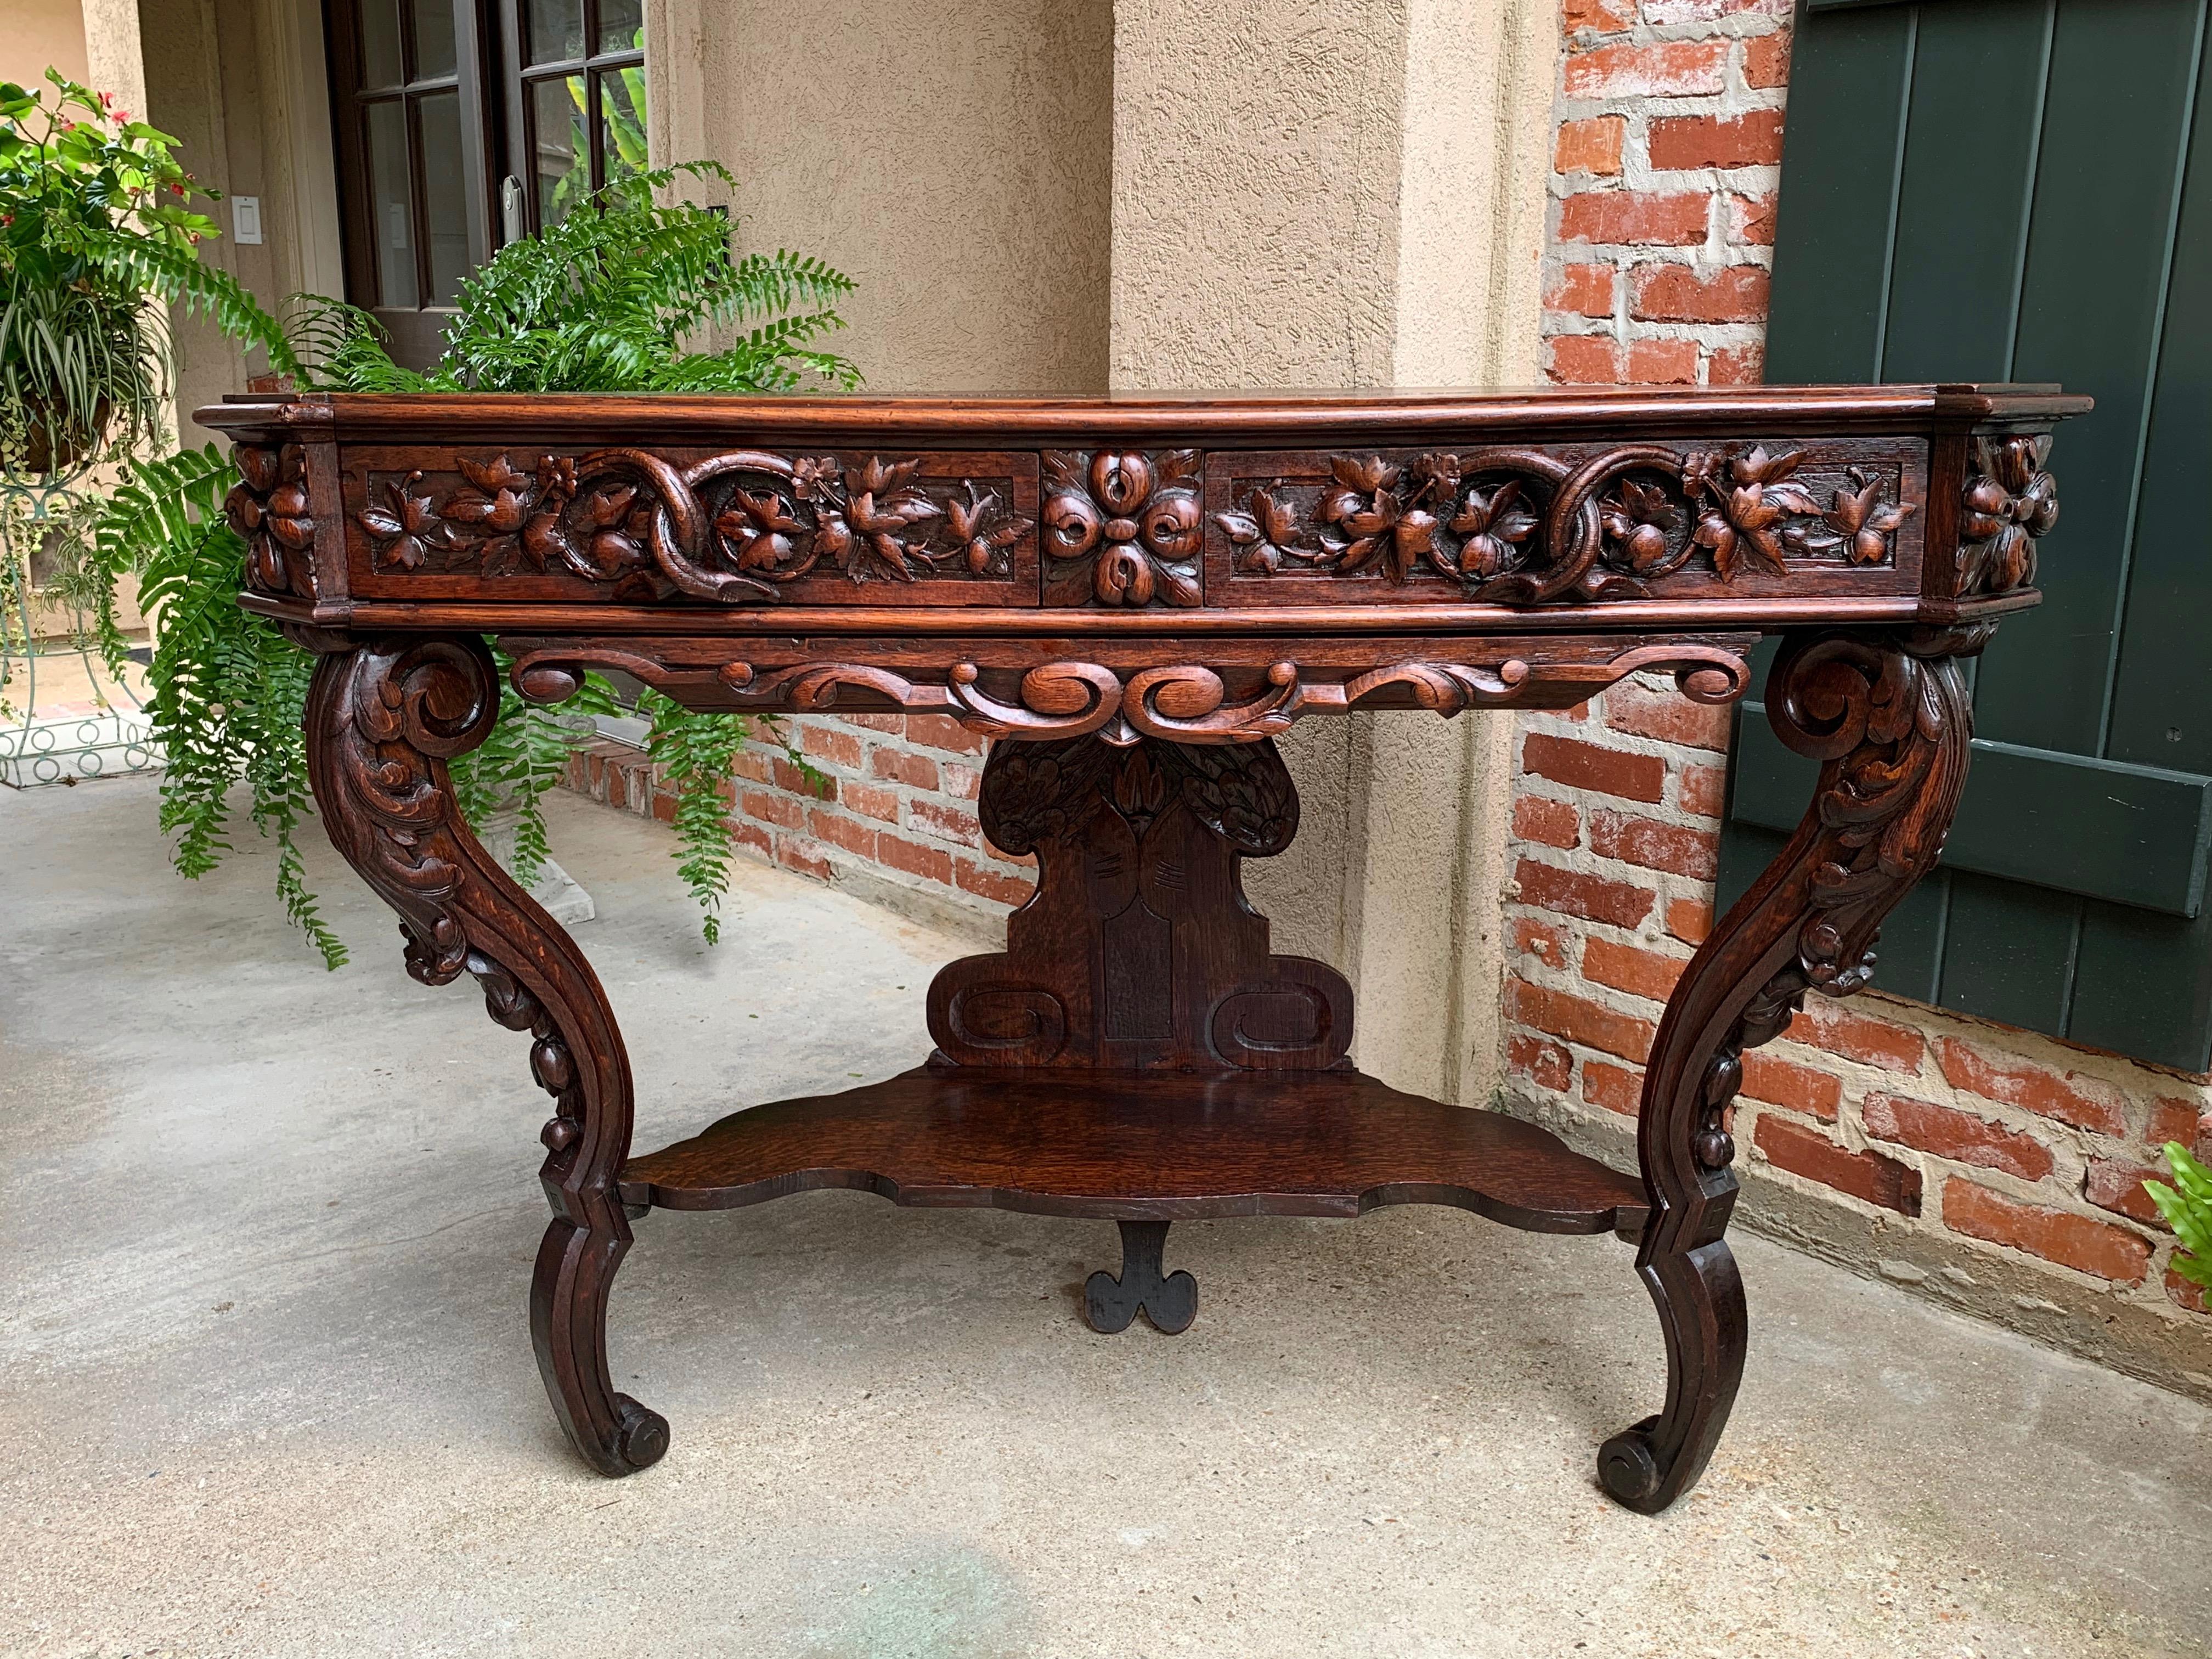 19th century French carved oak console sofa foyer table sideboard Black Forest

~Direct from France~
~Stunning hand carving on this oversized 19th century French table/console!~
~Large, open carved branches form both of the drawer pulls, set in the